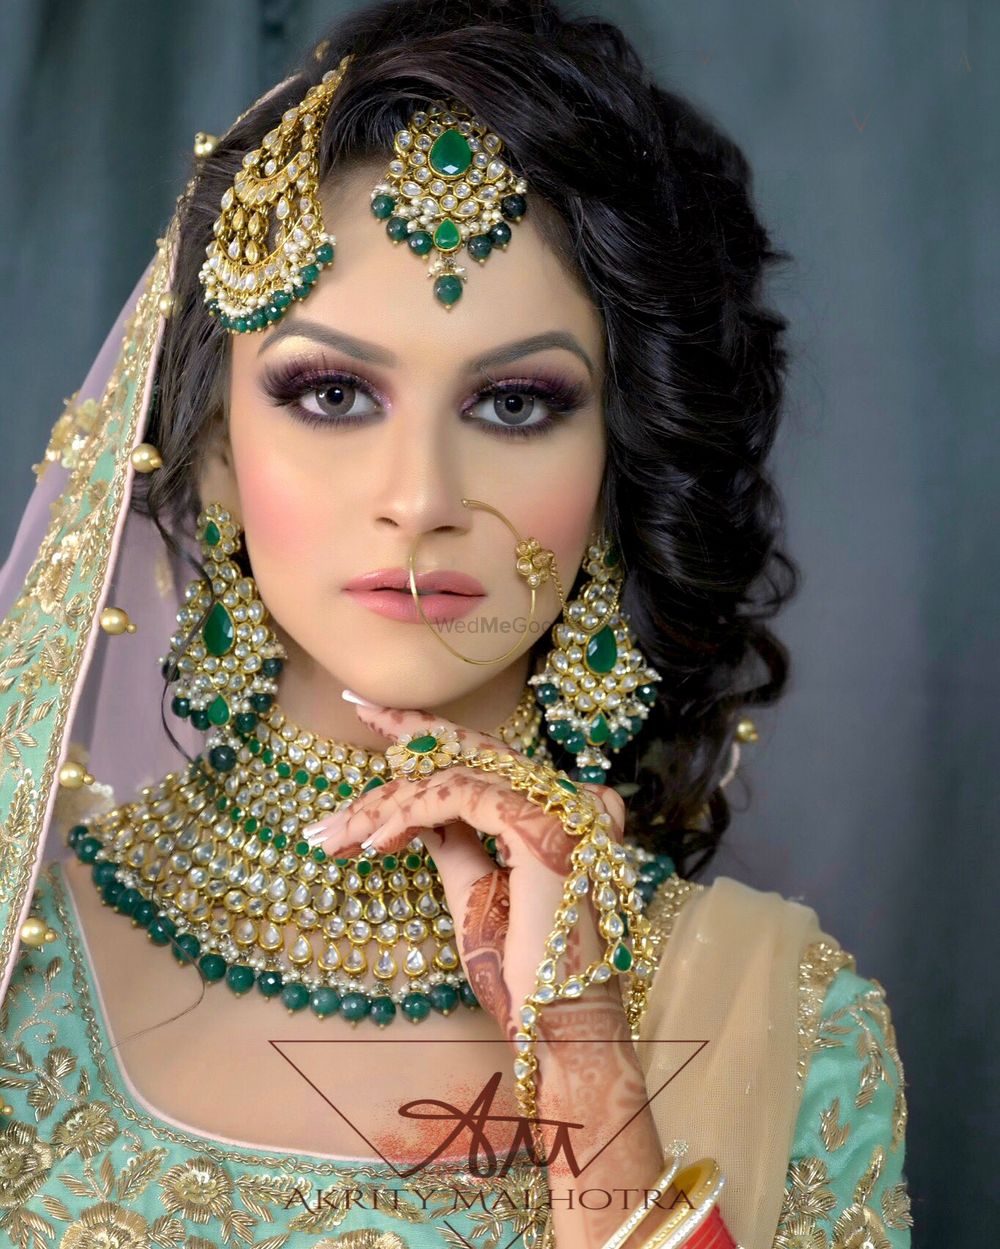 Photo From Brides - By Face Tales by Akrity Malhotra